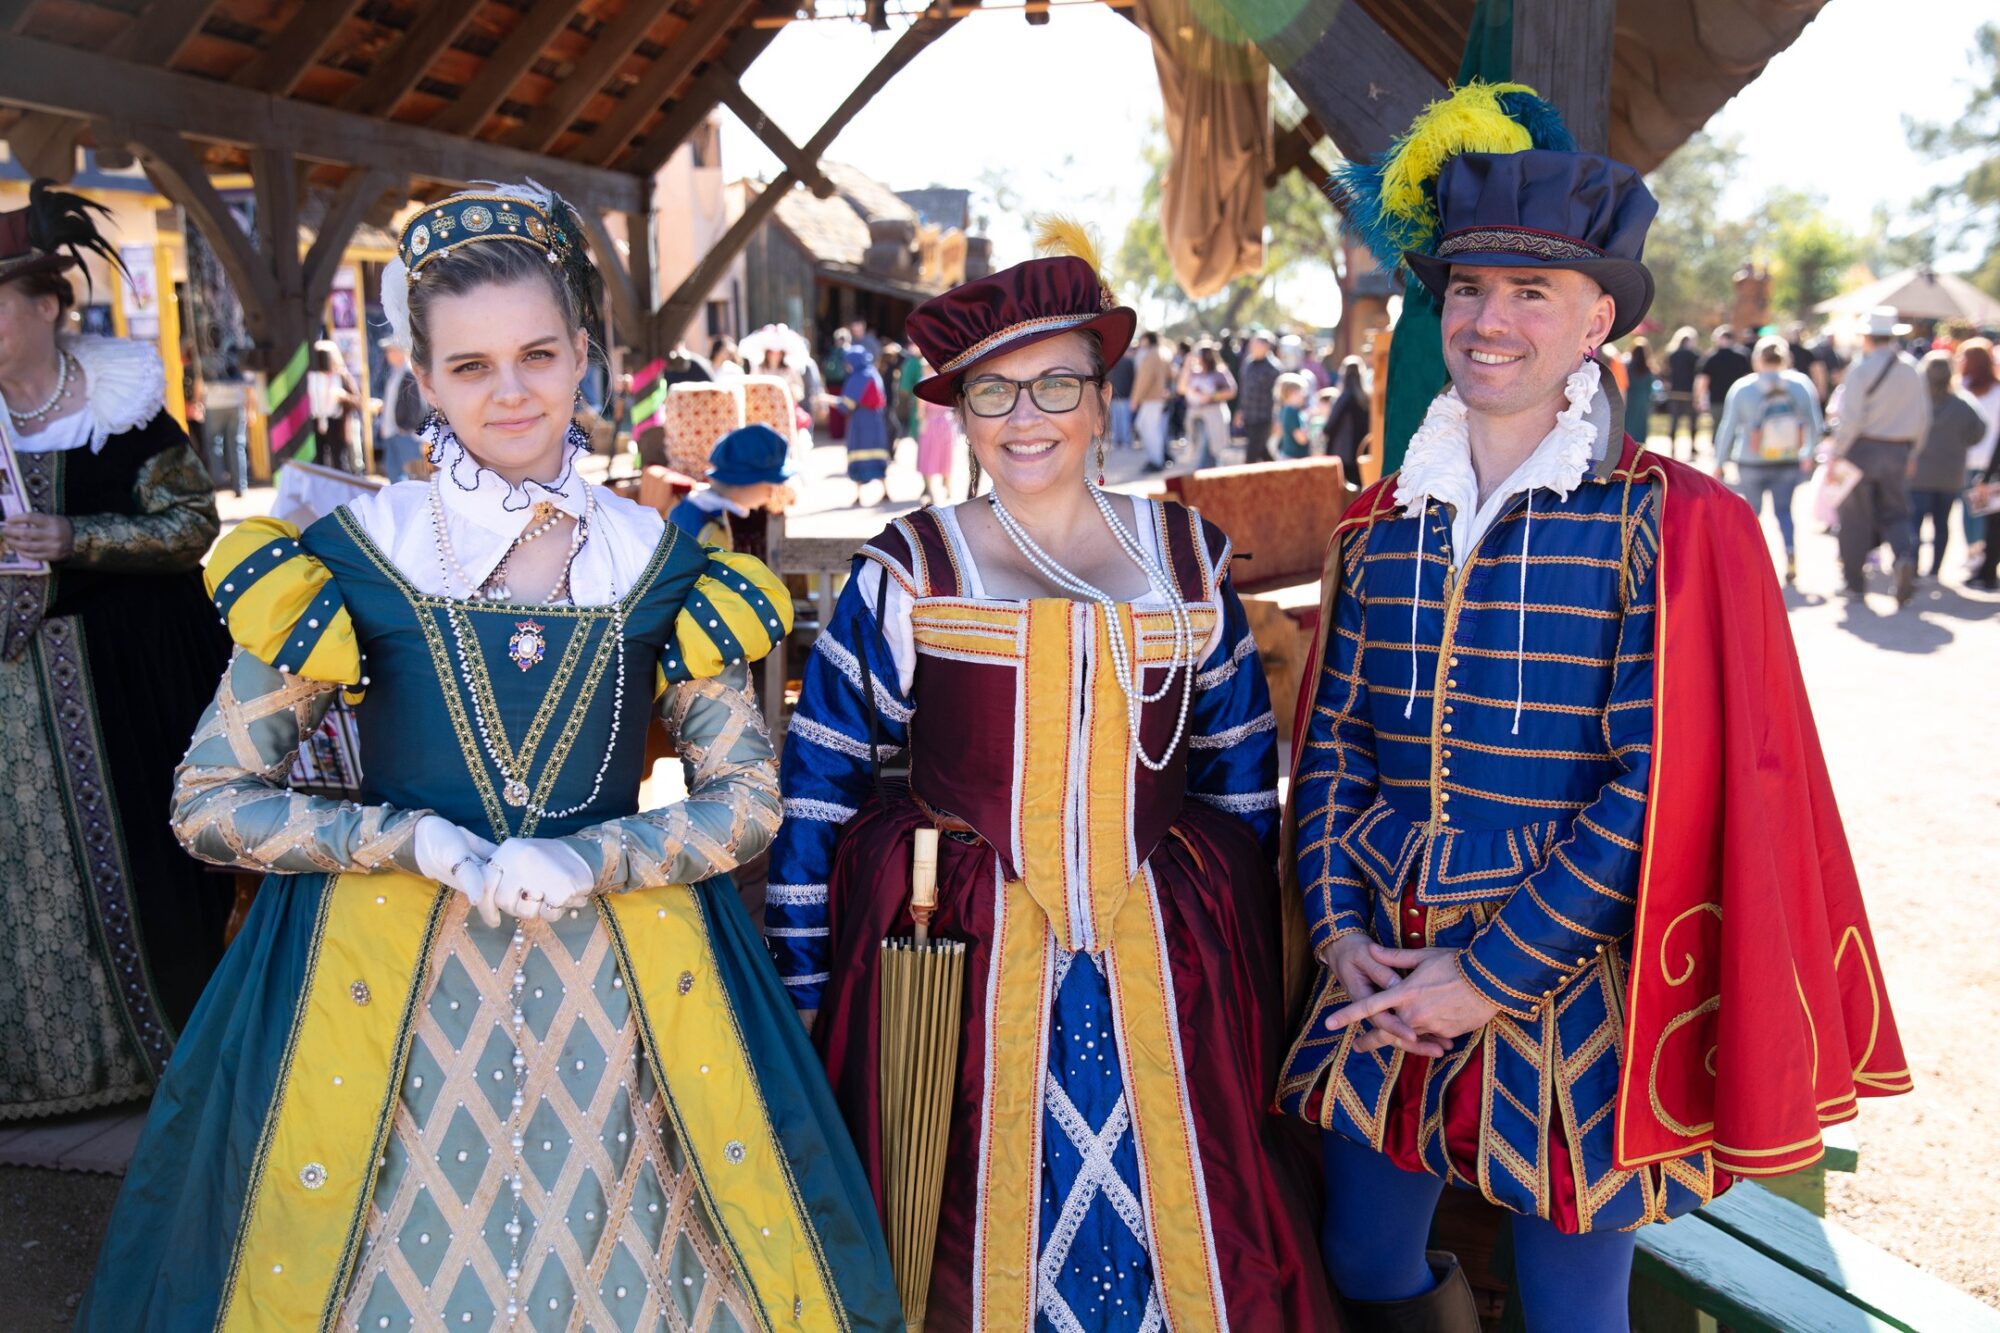 Three people are wearing renaissance costumes. There are two young women and one man.